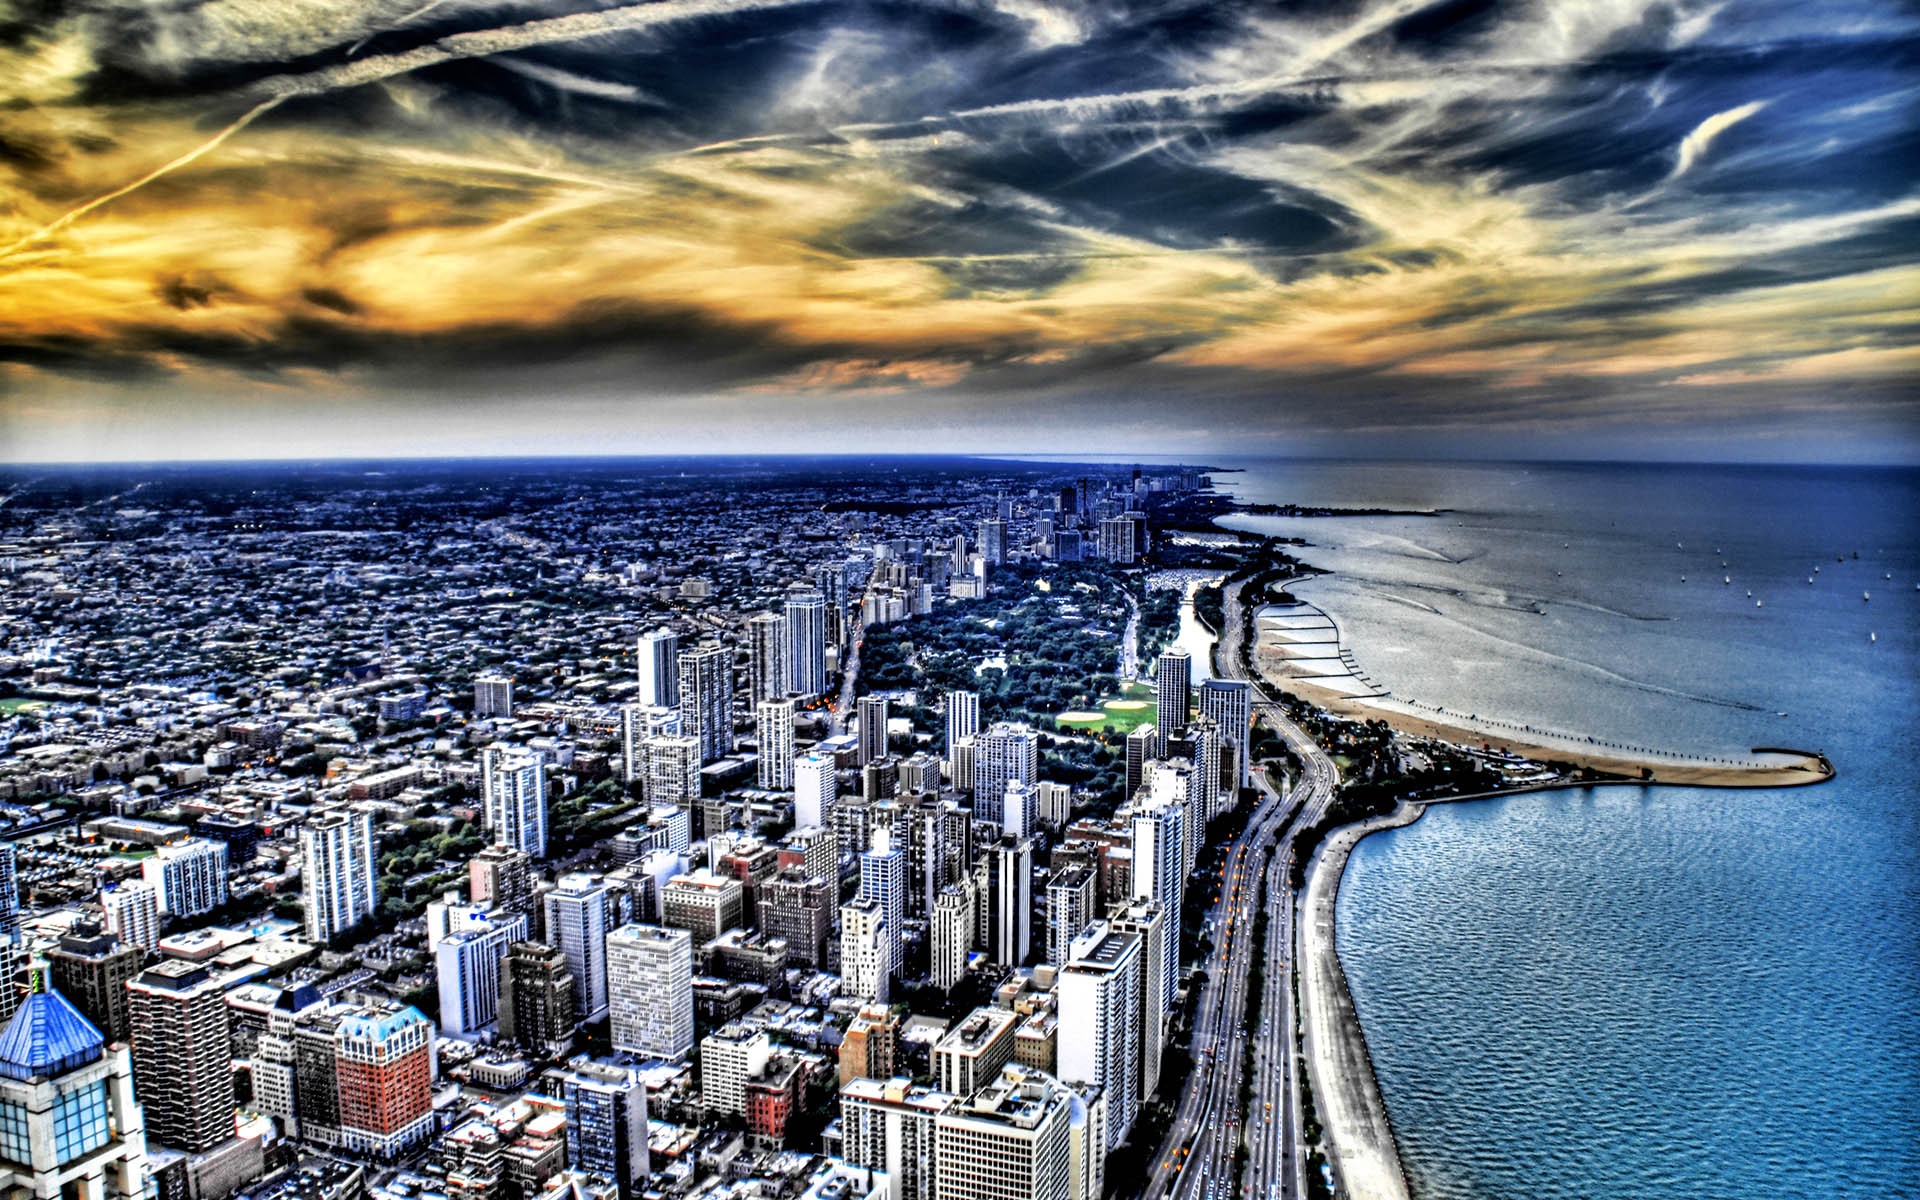 coast, cityscapes, Chicago, buildings, skyscrapers, Lake Michigan, HDR photography, Great Lakes, beaches - desktop wallpaper